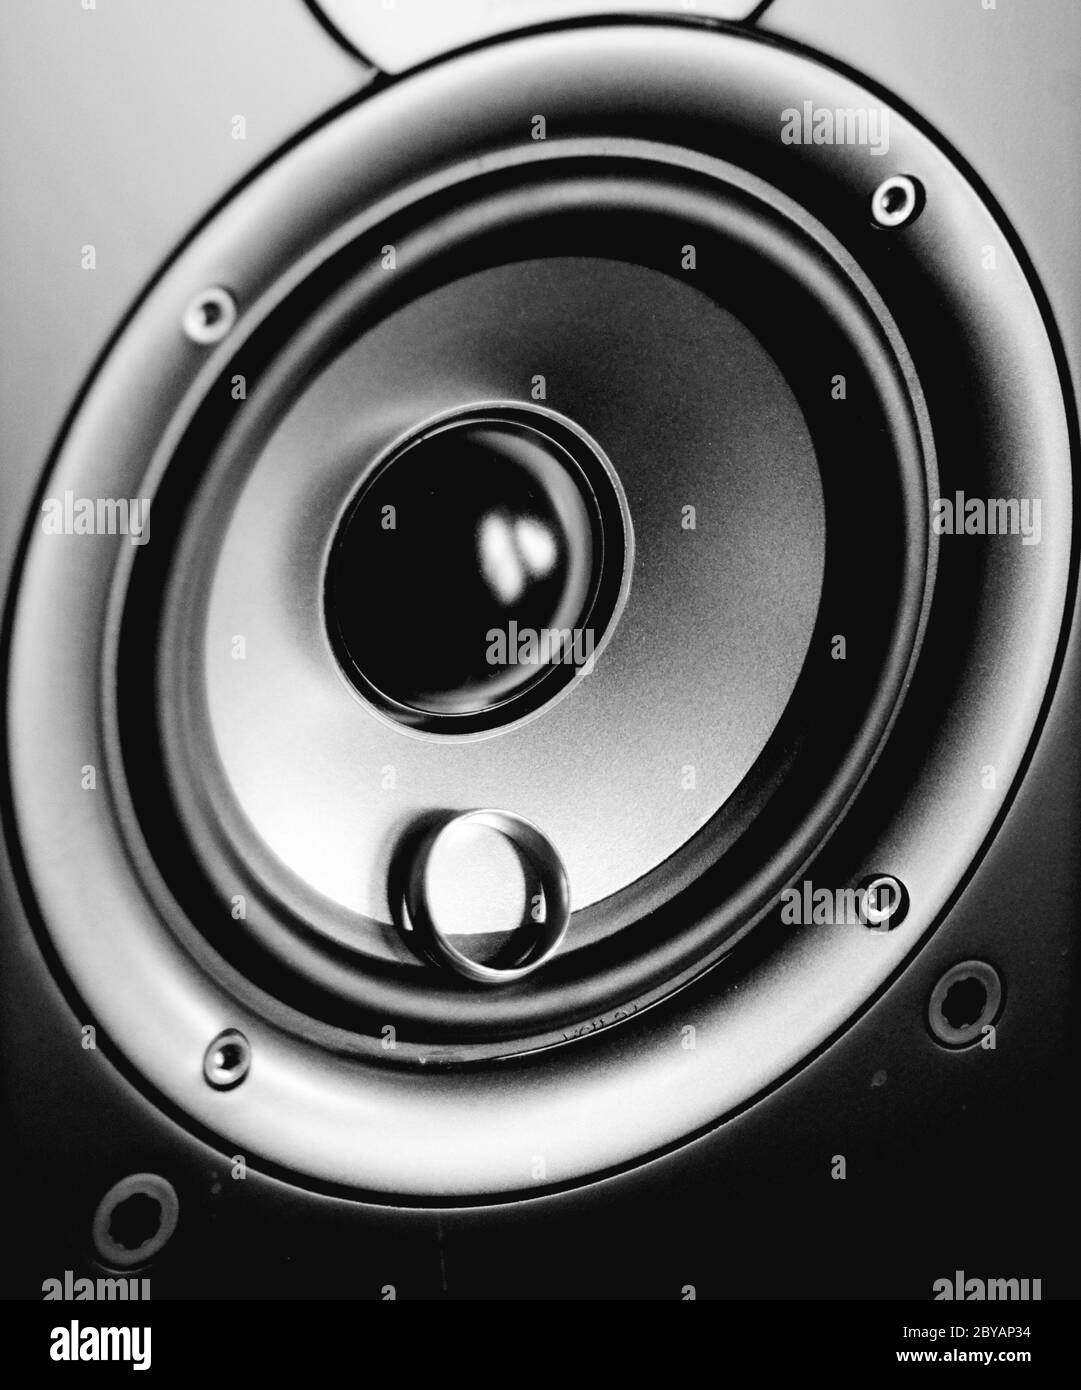 BLACKHOLE HORIZON: A gold ring spins along the axis of revolving speaker. Stock Photo